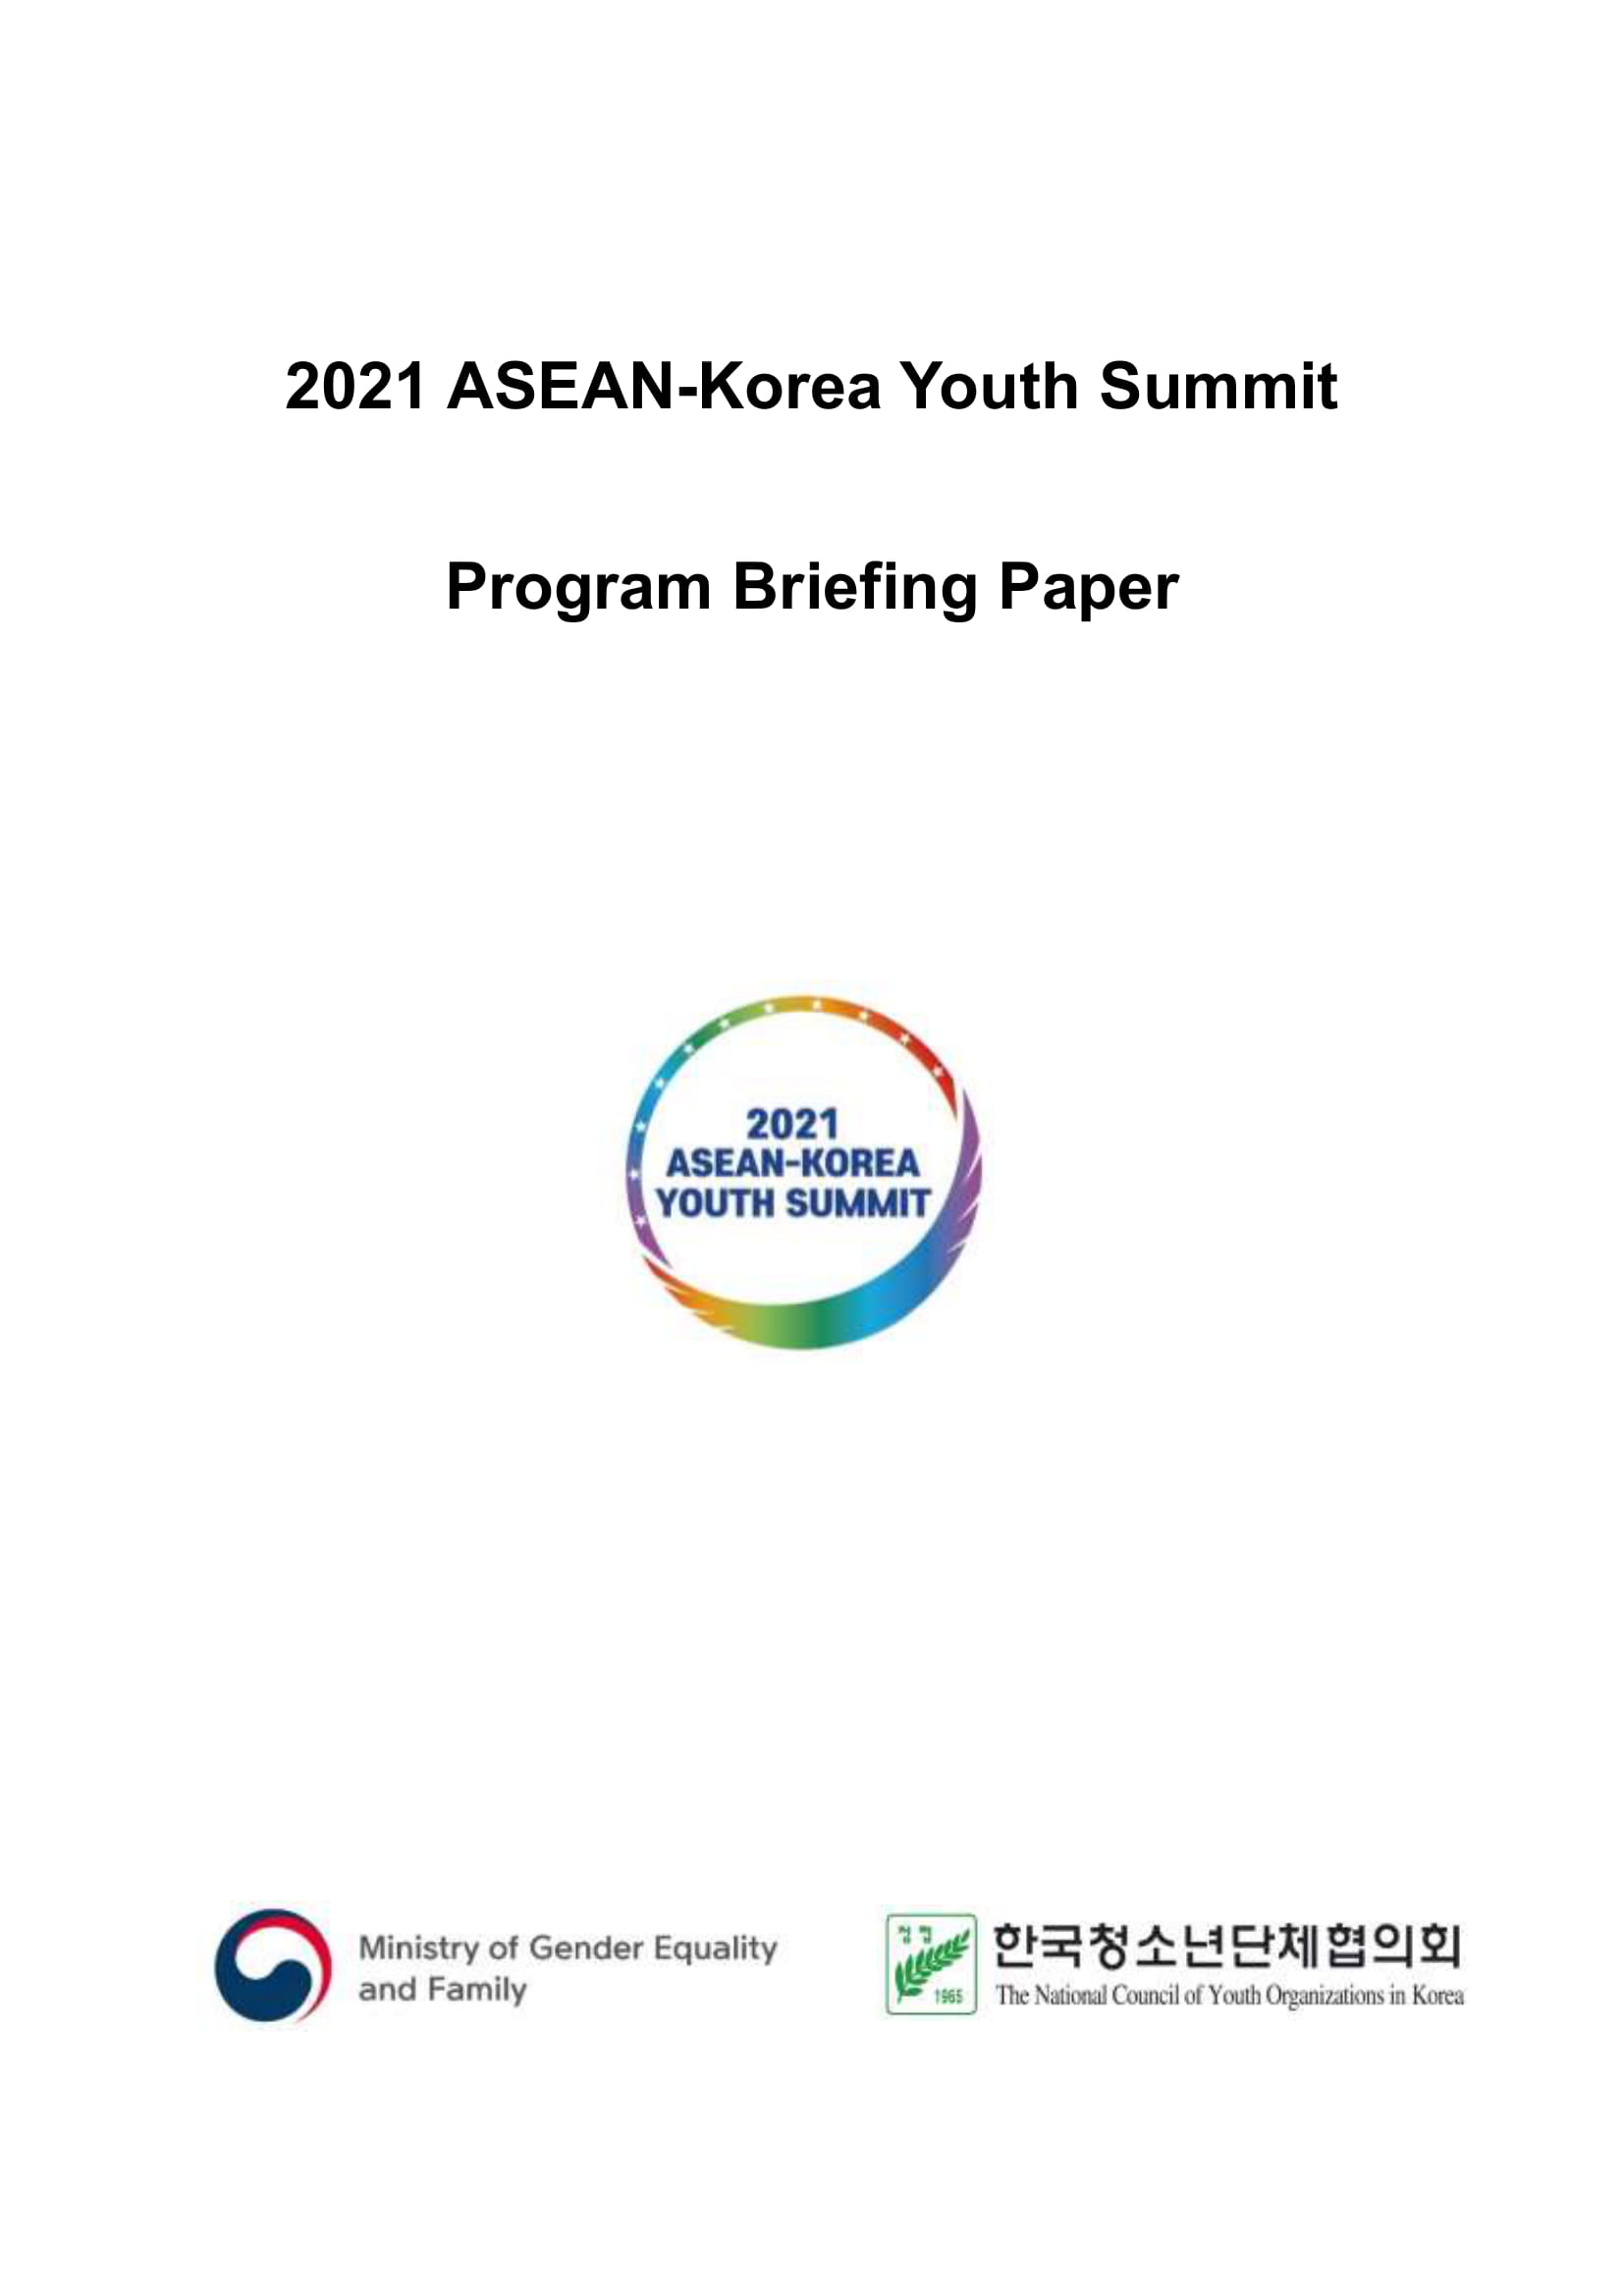 Invitation to nominate students to the ASEAN-Korea Youth Summit, 10-13 August 2021